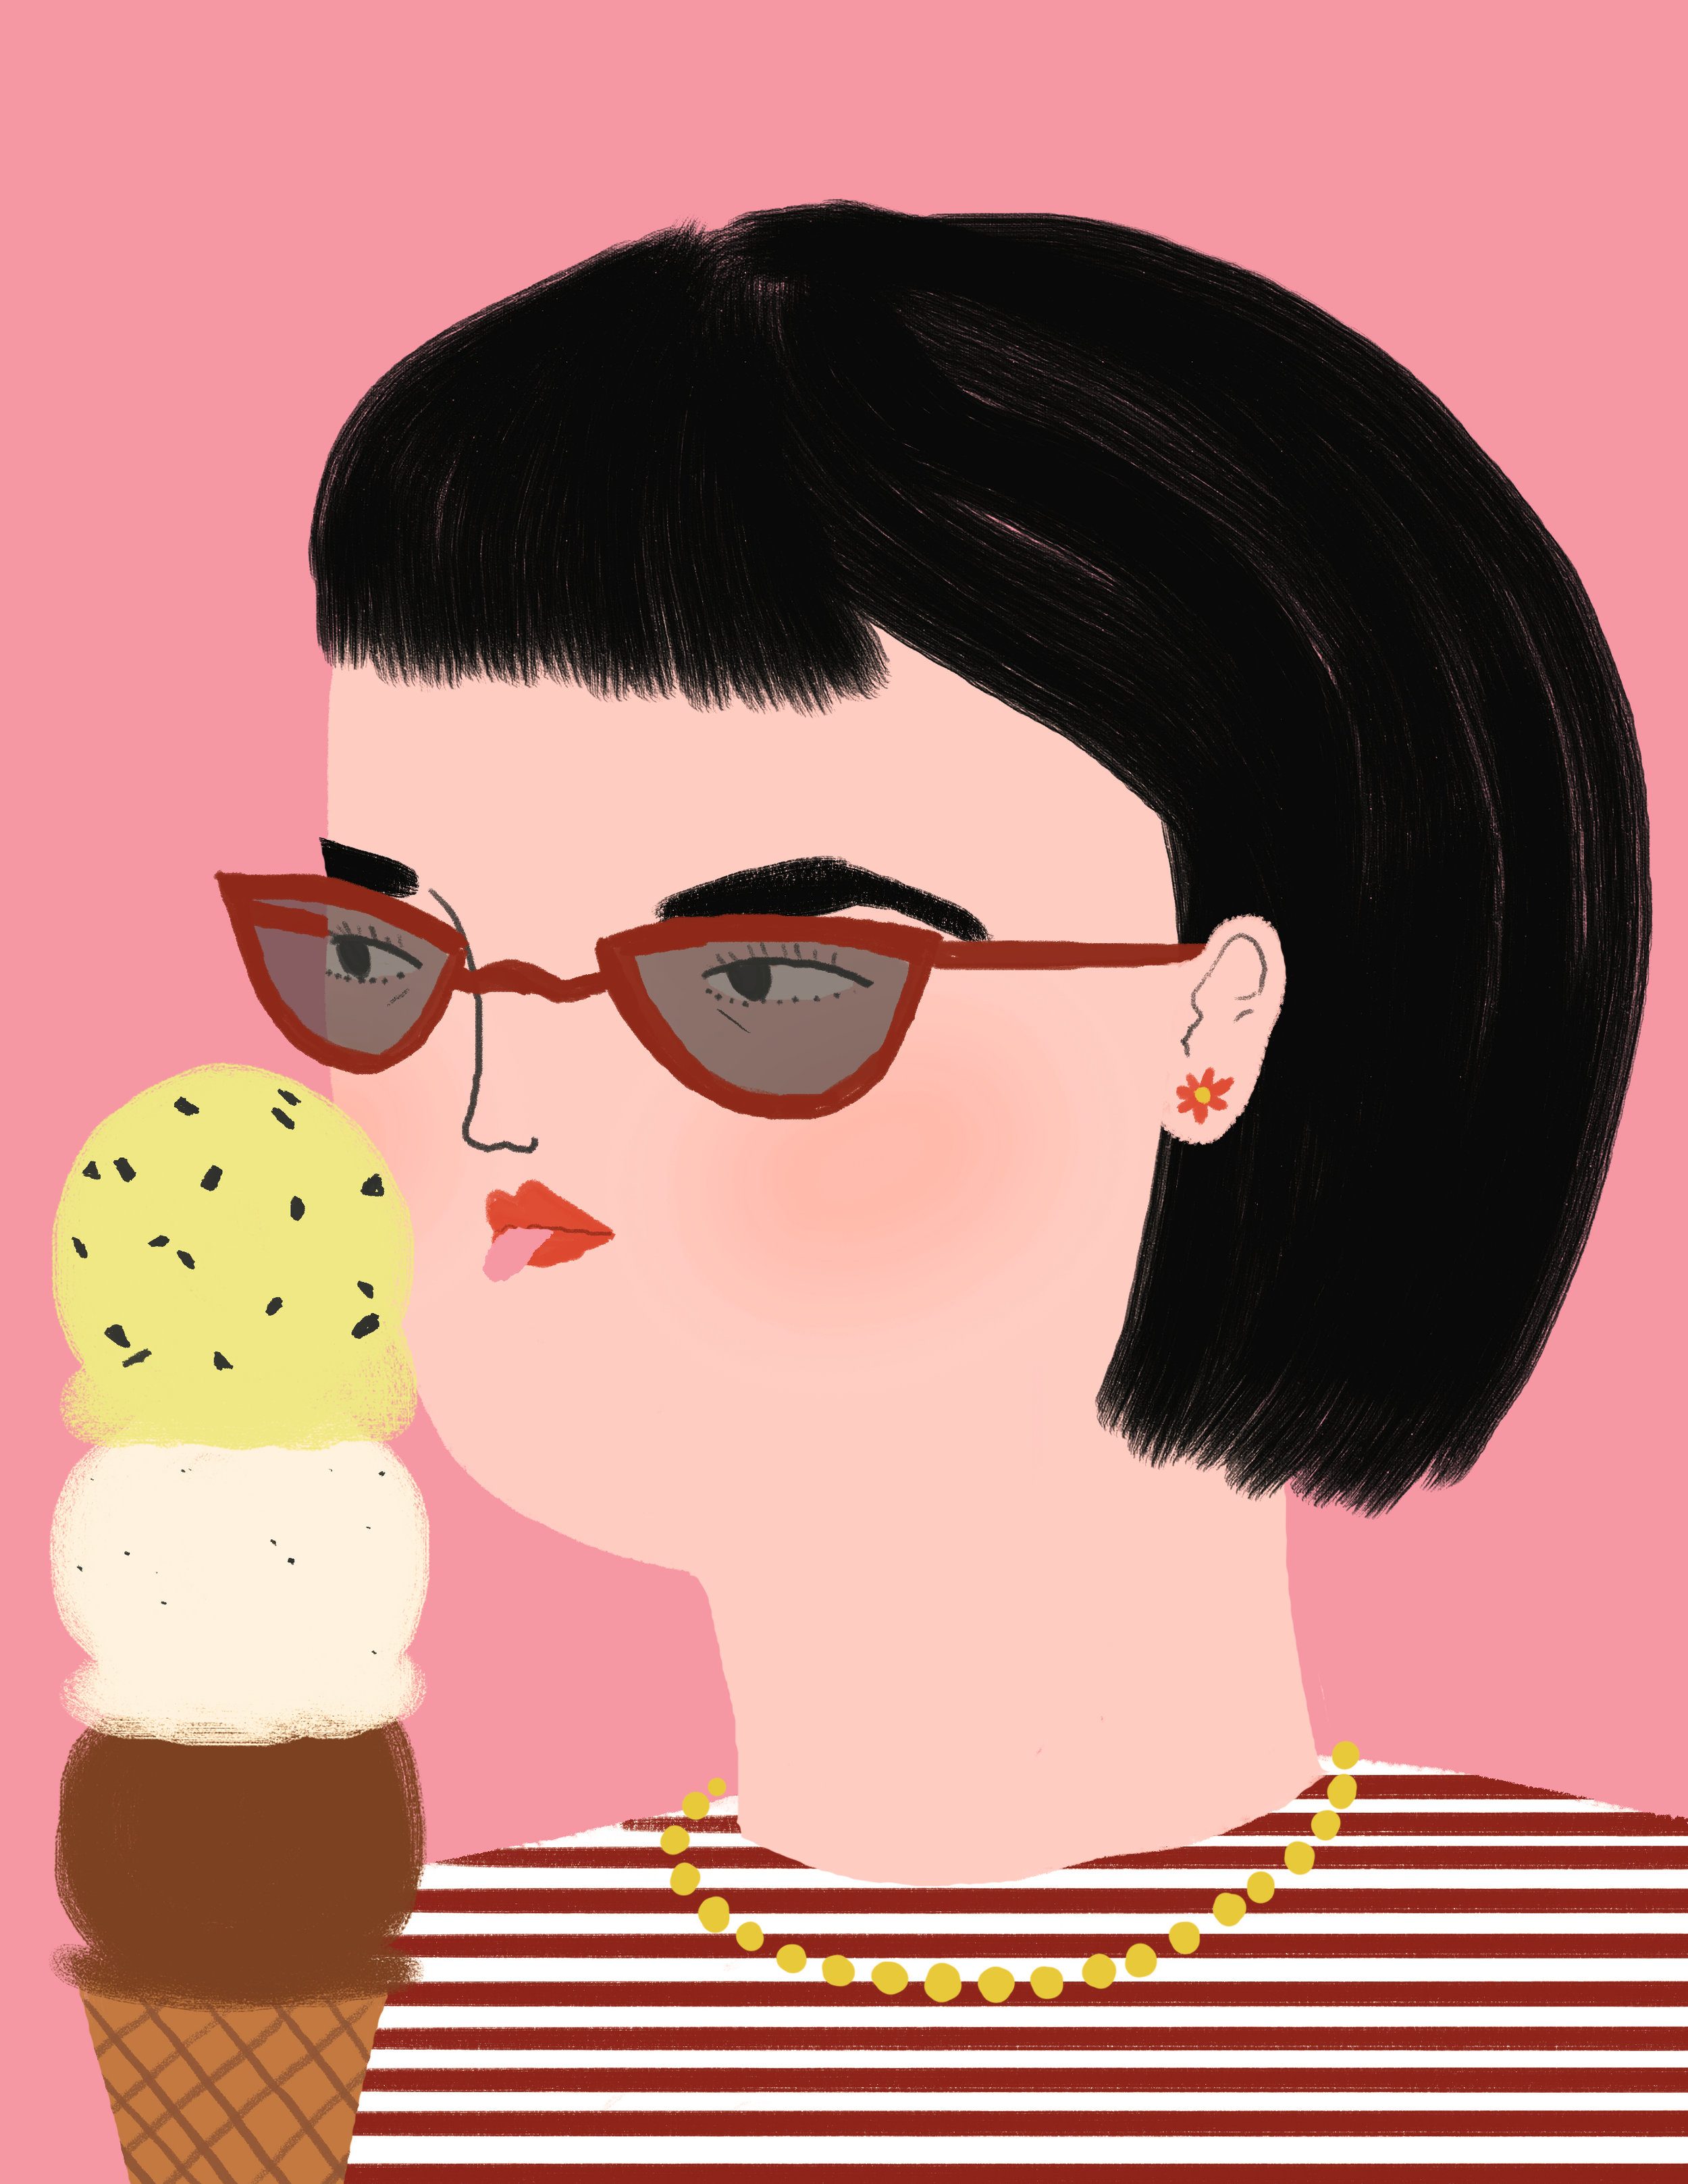 Lady and Sweets series